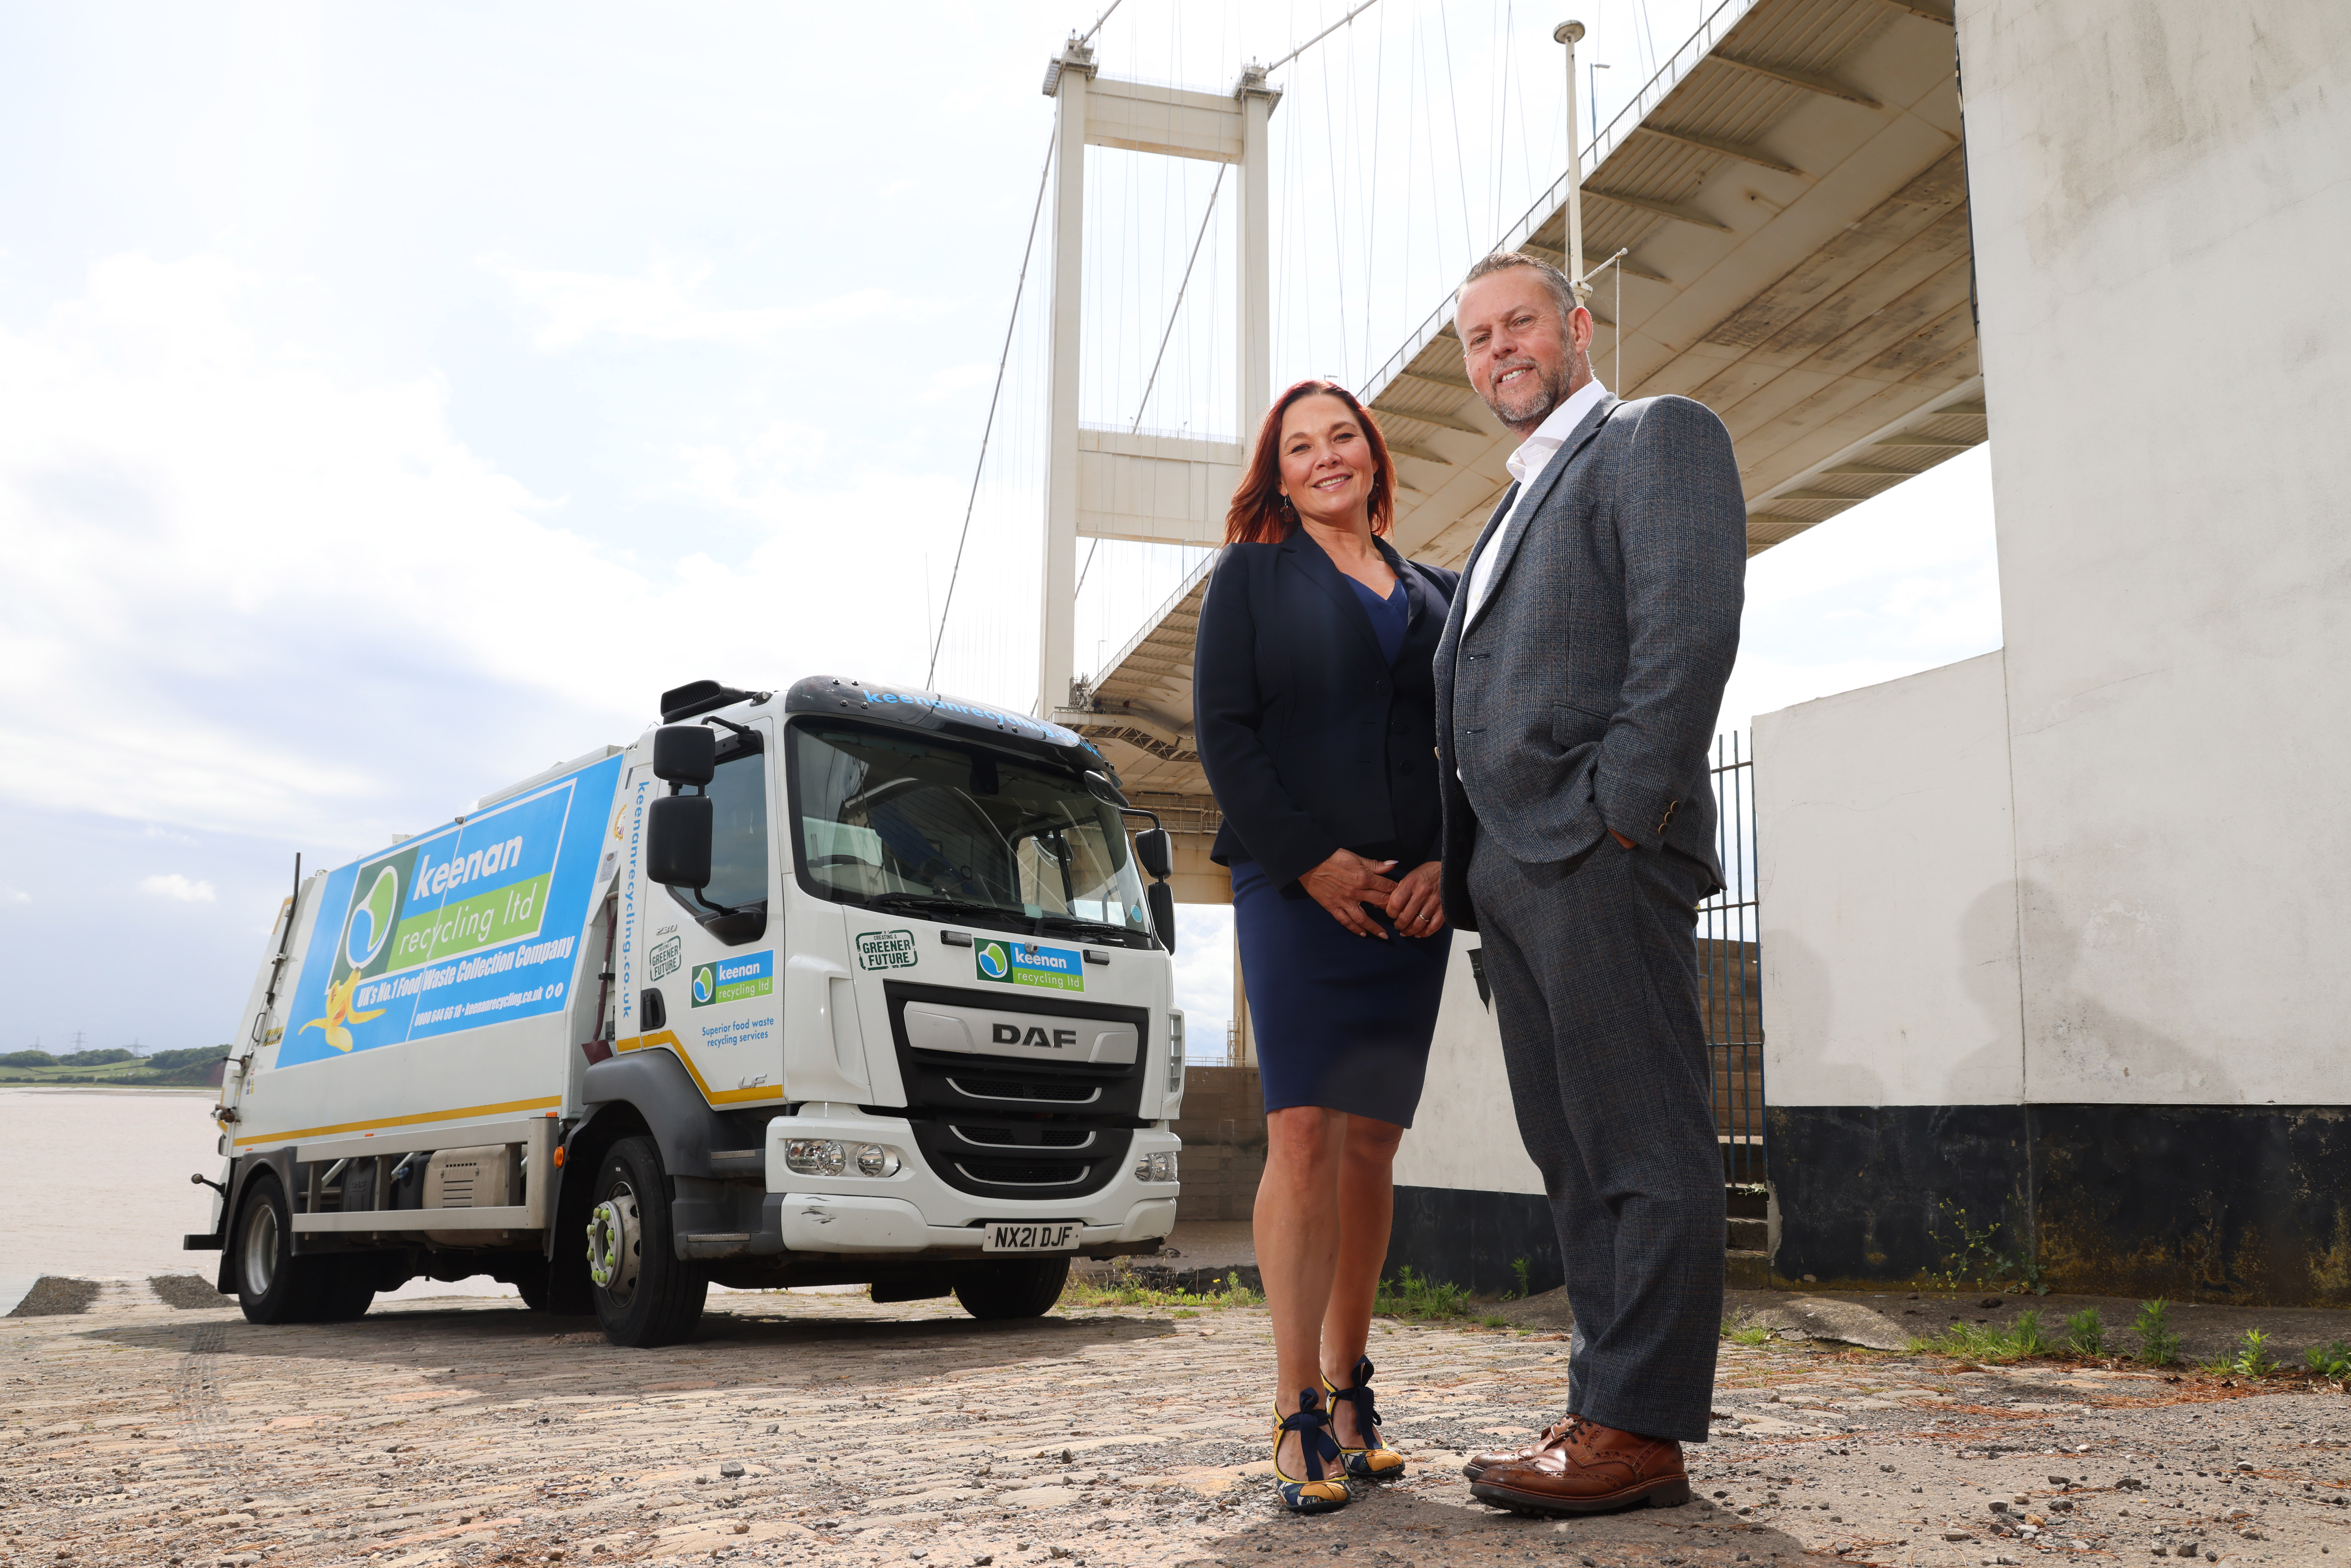 Keenan Recycling, one of the UK’s largest food waste recycling companies, is expanding operations in South Wales as part of a wider £2m spend to support growth plans - Grant Keenan (Managing Director of Keenan Recycling) and Claire Keenan (Collections Director of Keenan Recycling) at the Severn Bridge - 13.7.2023 Picture by Antony Thompson - Thousand Word Media, NO SALES, NO SYNDICATION. Contact for more information mob: 07775556610 web: www.thousandwordmedia.com email: antony@thousandwordmedia.com The photographic copyright (© 2023) is exclusively retained by the works creator at all times and sales, syndication or offering the work for future publication to a third party without the photographer's knowledge or agreement is in breach of the Copyright Designs and Patents Act 1988, (Part 1, Section 4, 2b). Please contact the photographer should you have any questions with regard to the use of the attached work and any rights involved.